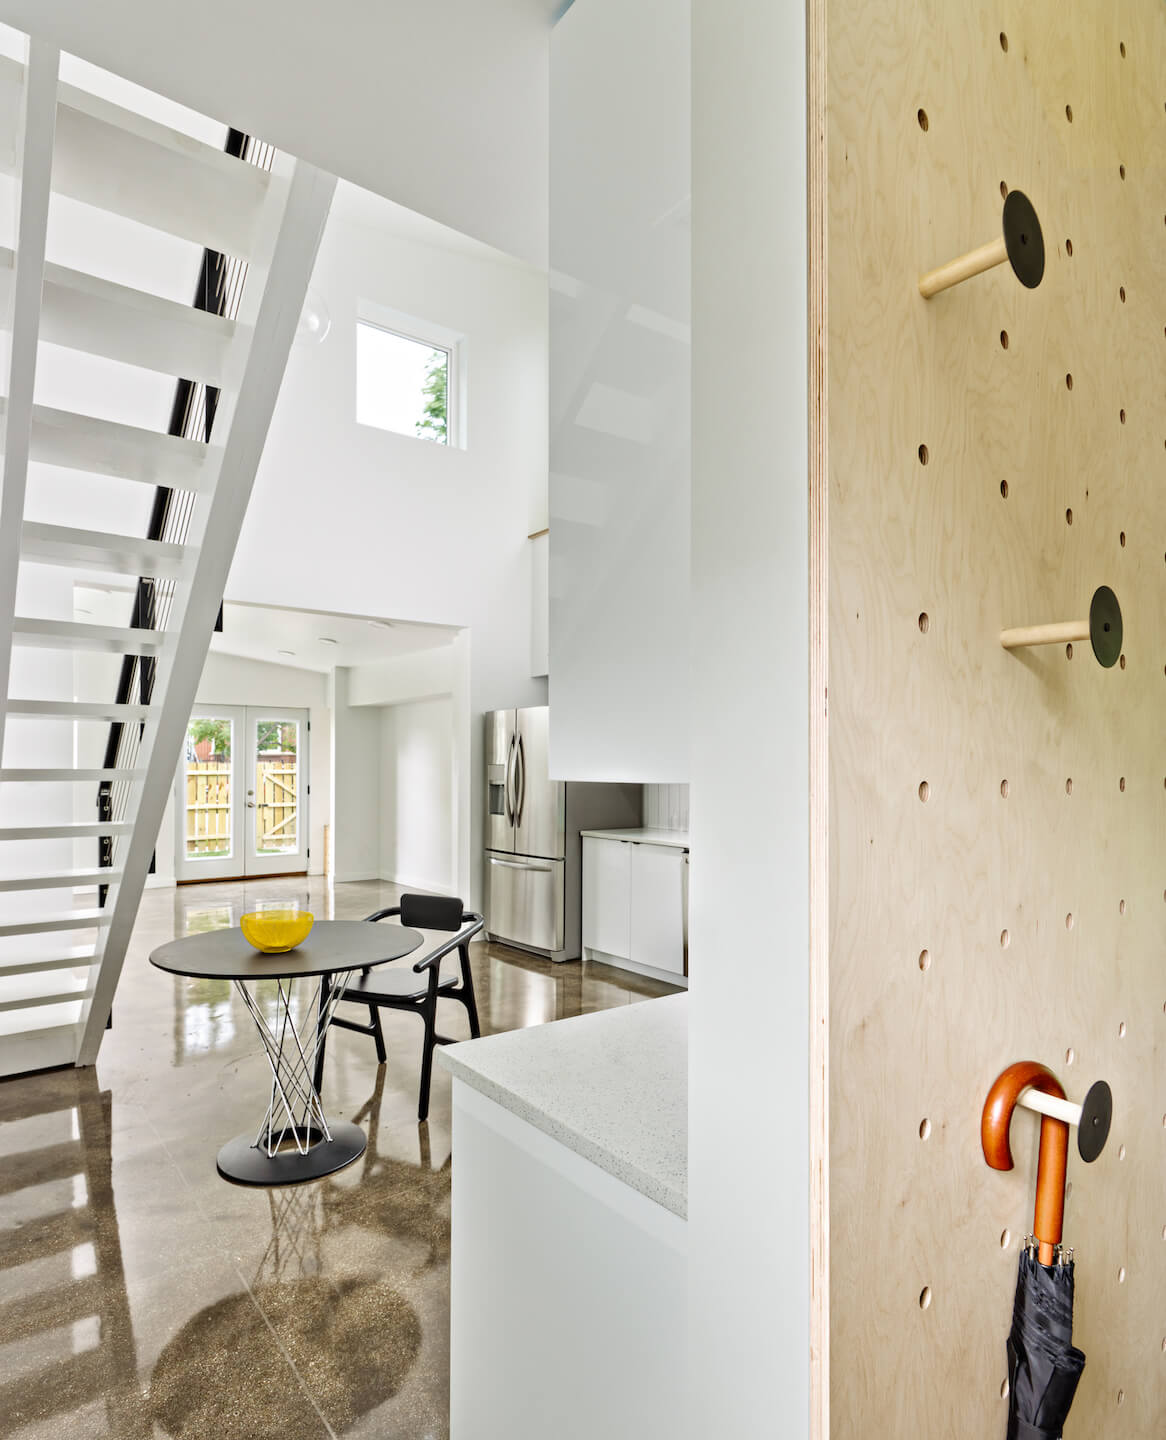 view of an open kitchen space with pegboard storage